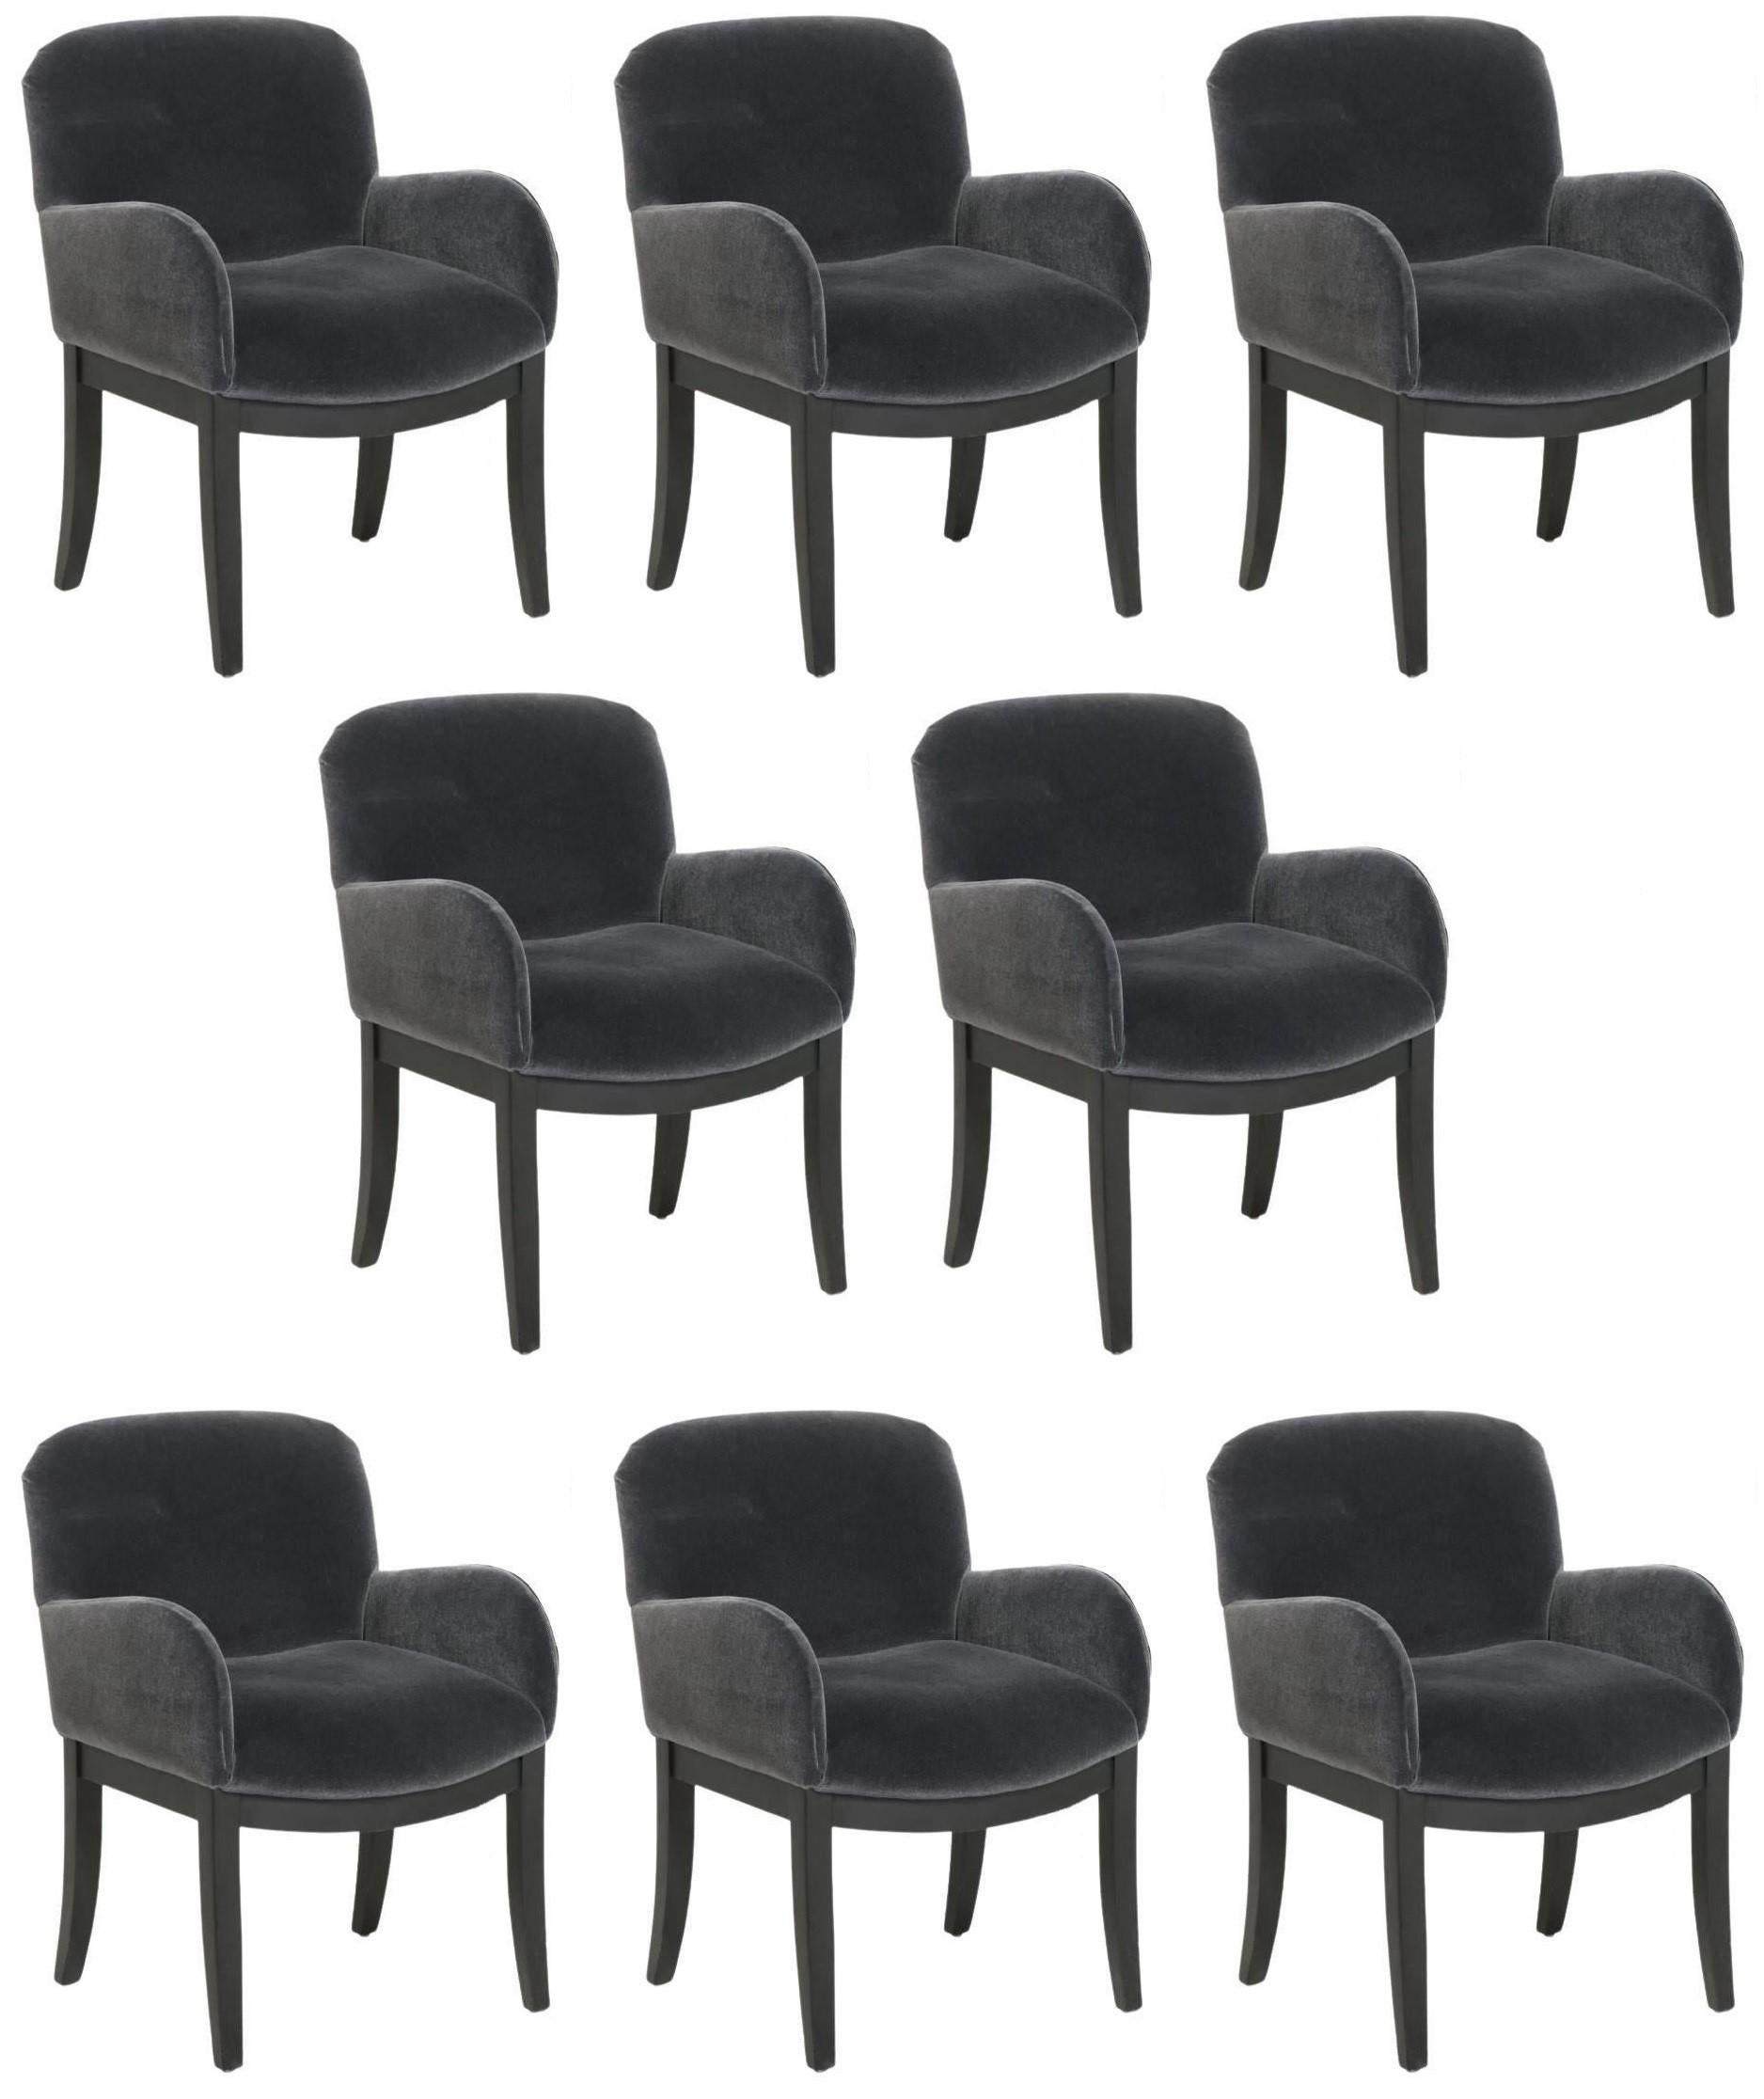 Milo Baughman Set of 8 Dining Chairs, c. 1986 For Sale